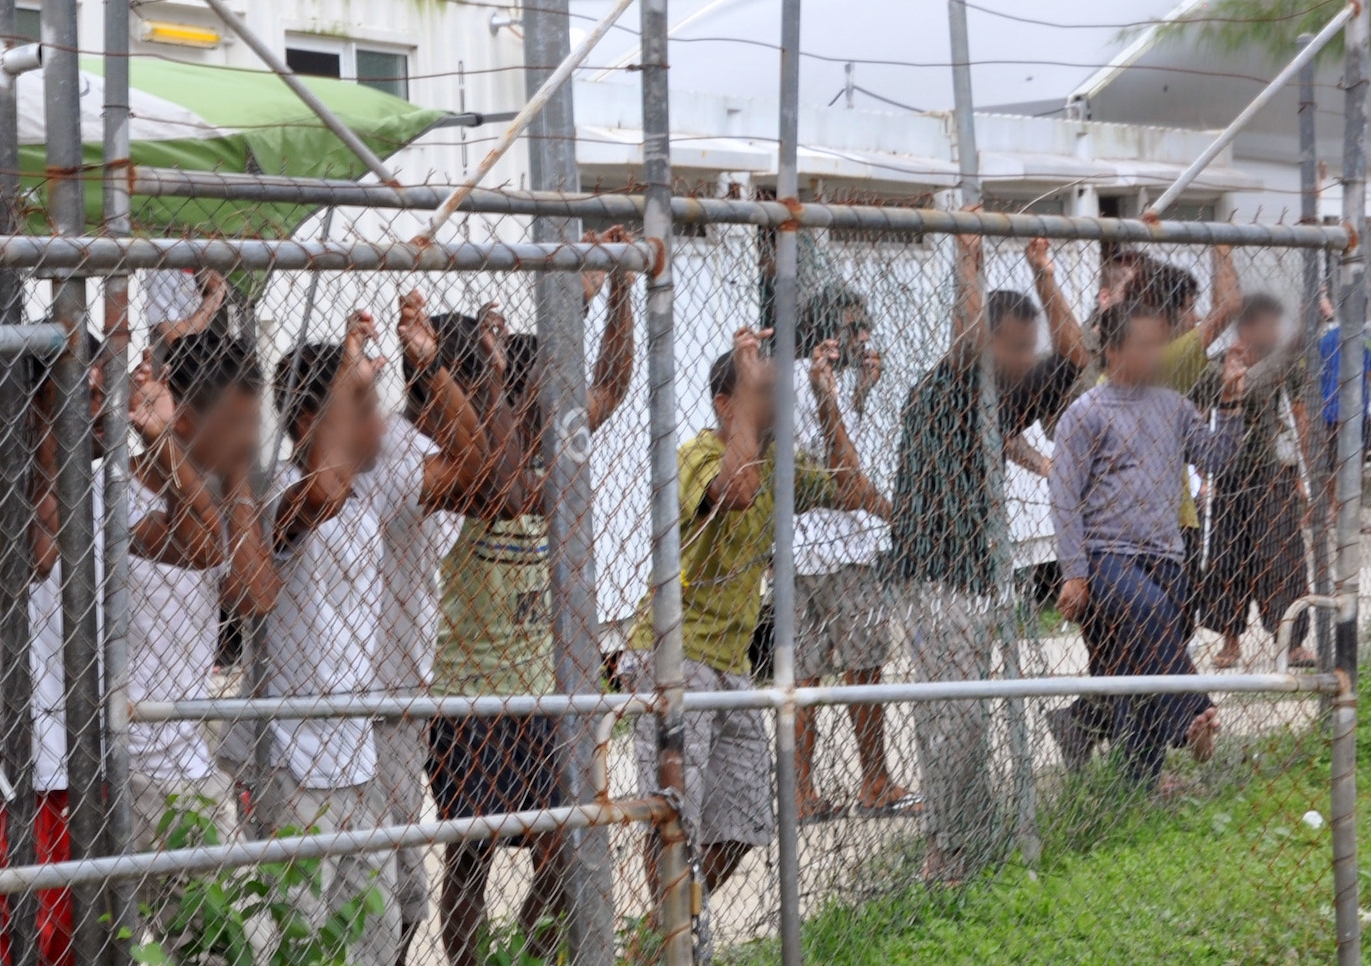 Asylum seekers at the Manus Island detention centre in Papua New Guinea in 2014. Photo: Eoin Blackwell/AAP